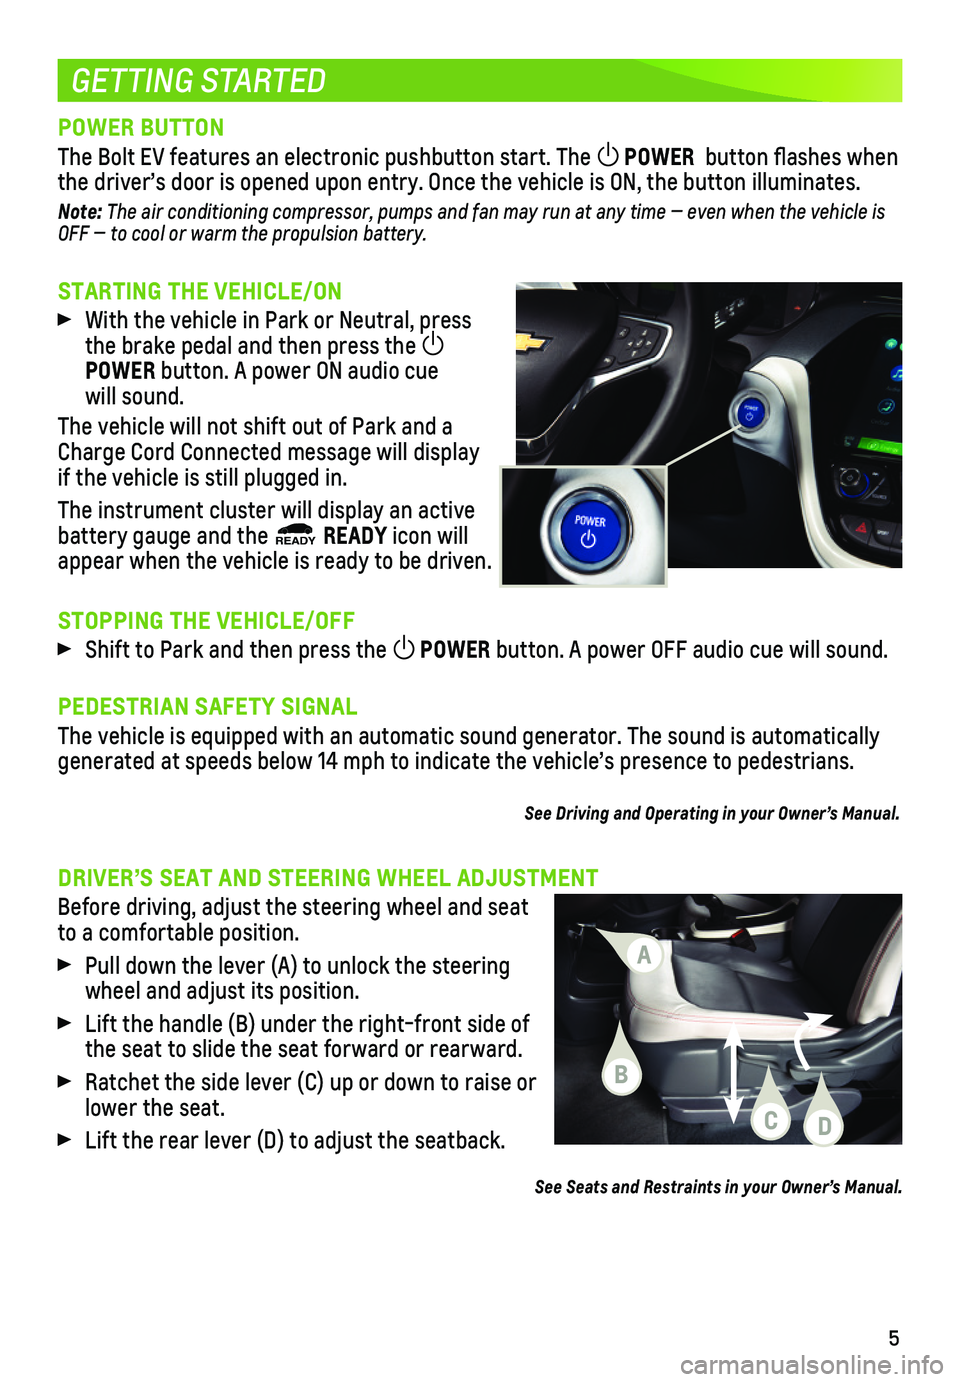 CHEVROLET BOLT EV 2019  Get To Know Guide 5
STARTING THE VEHICLE/ON
 With the vehicle in Park or Neutral, press the brake pedal and then press the POWER button. A power ON audio cue will sound.
The vehicle will not shift out of Park and a Ch